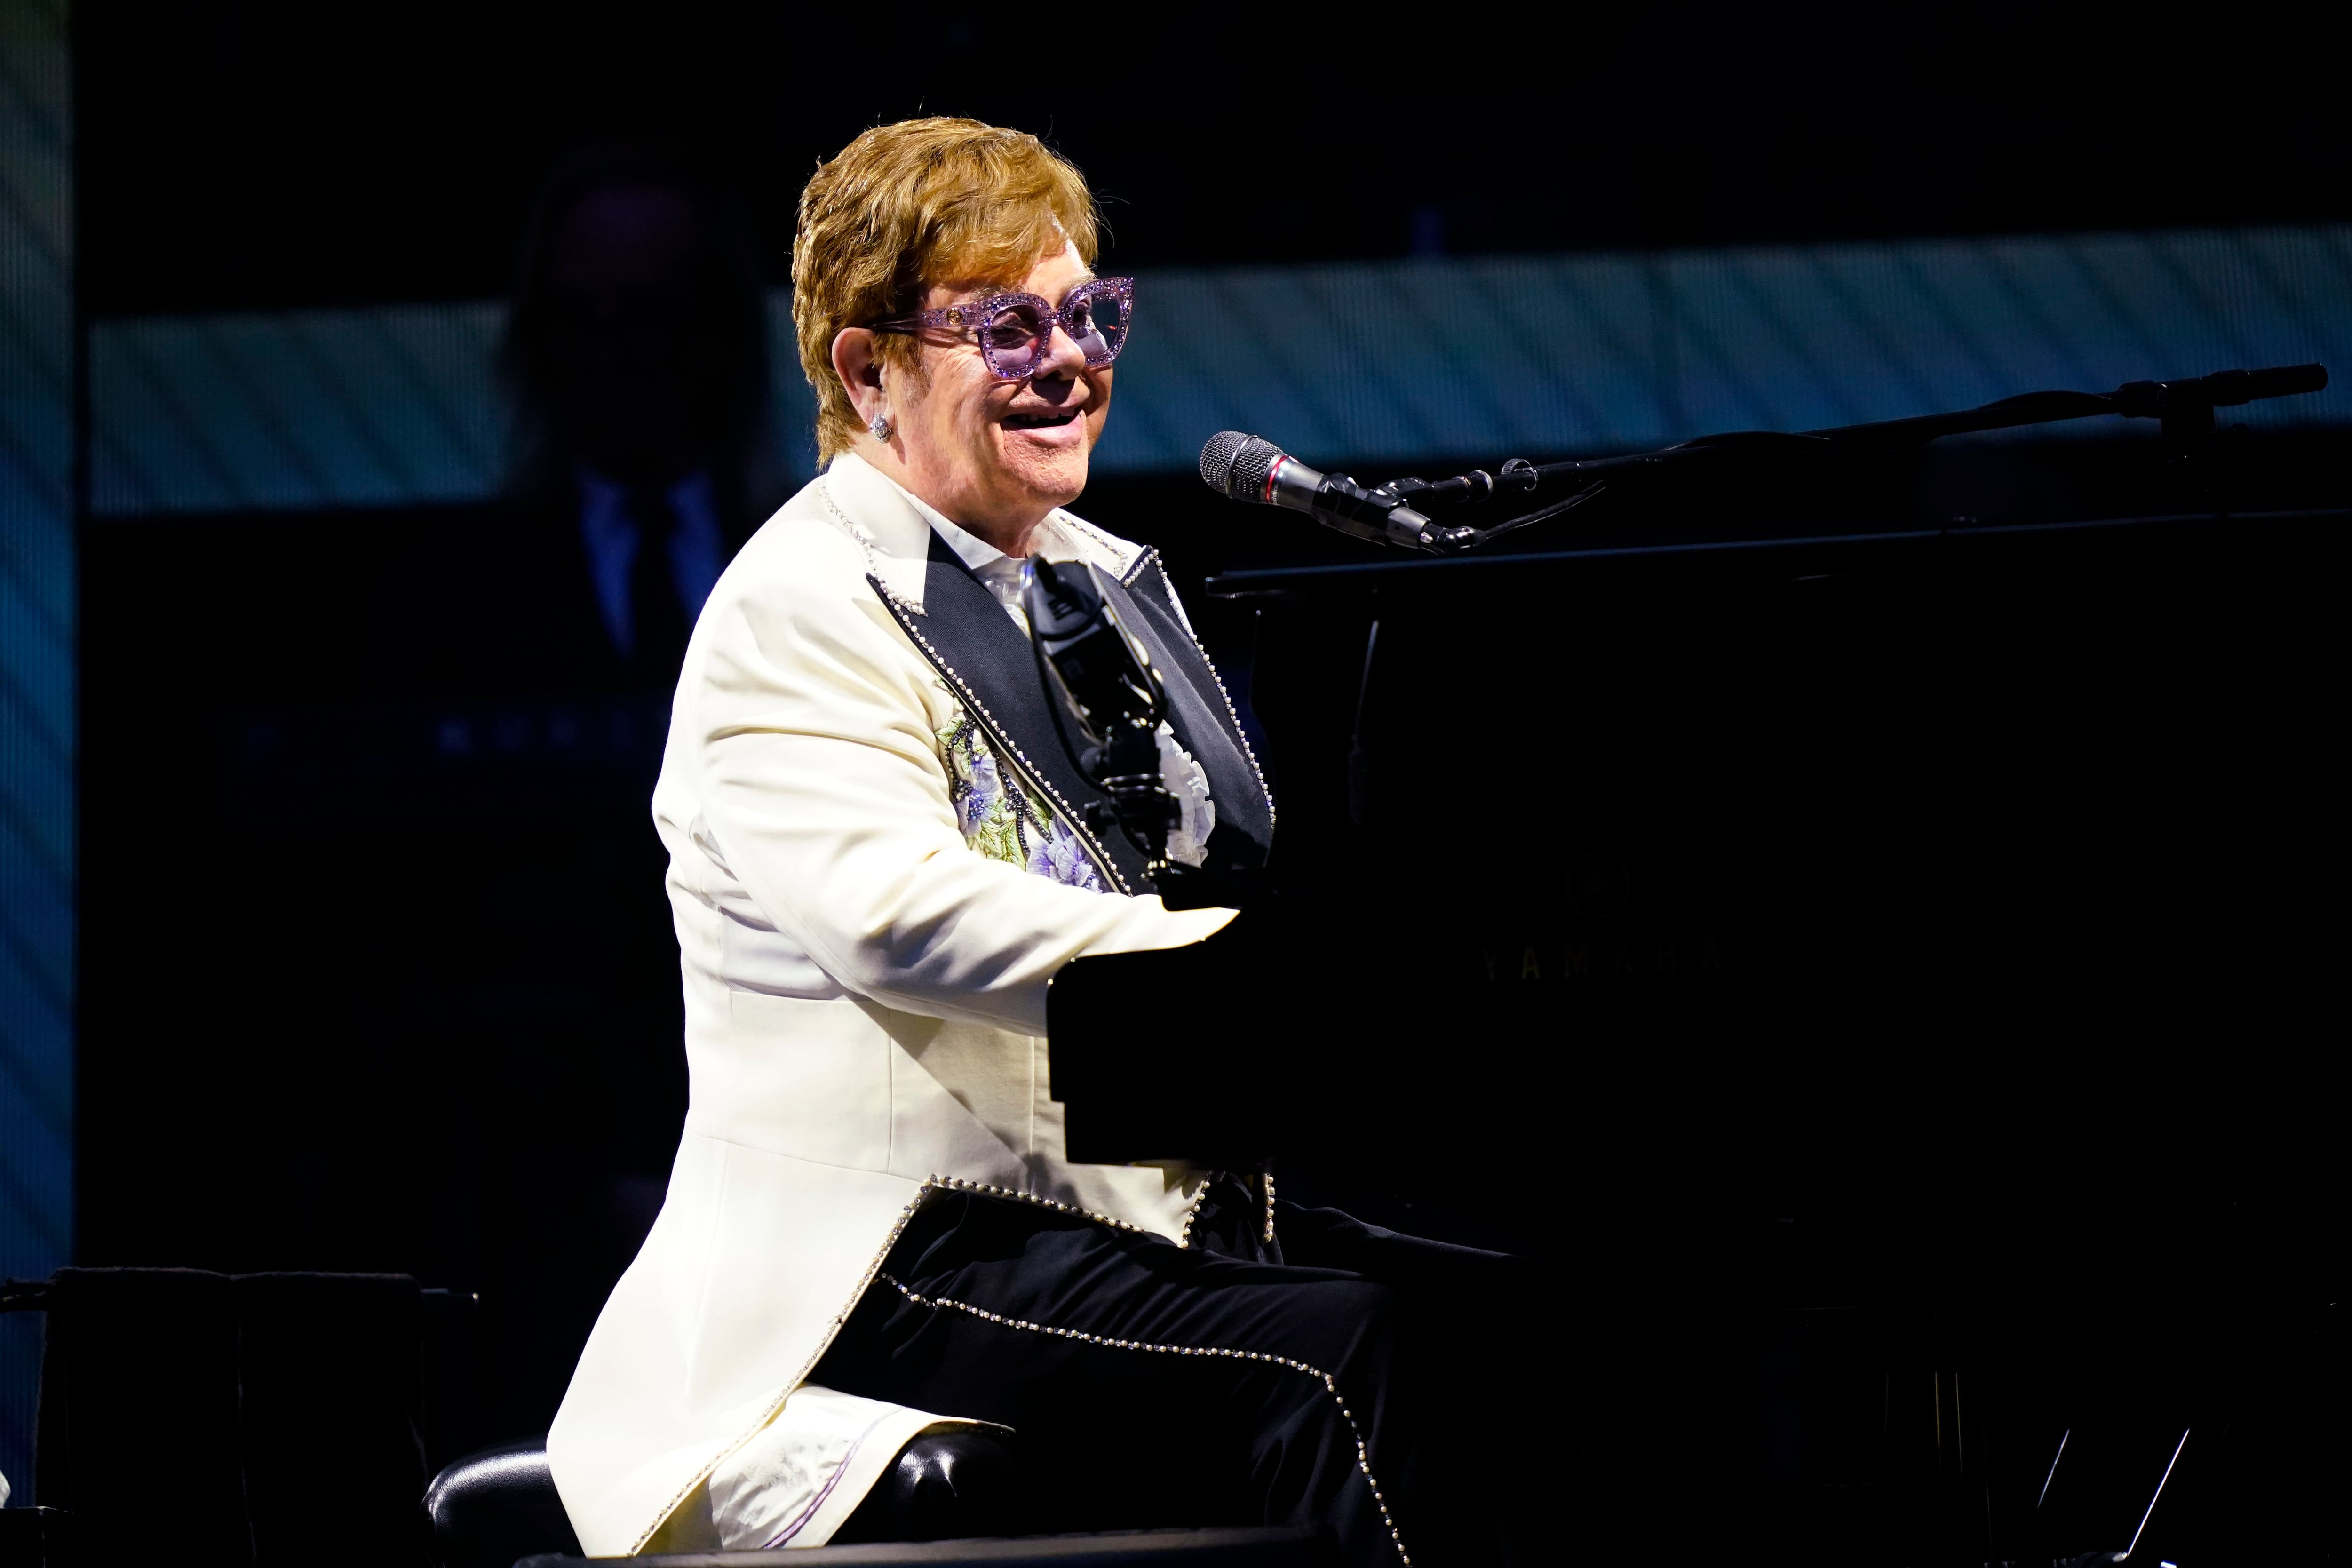 From the end of the world to your town, Elton John’s goodbye